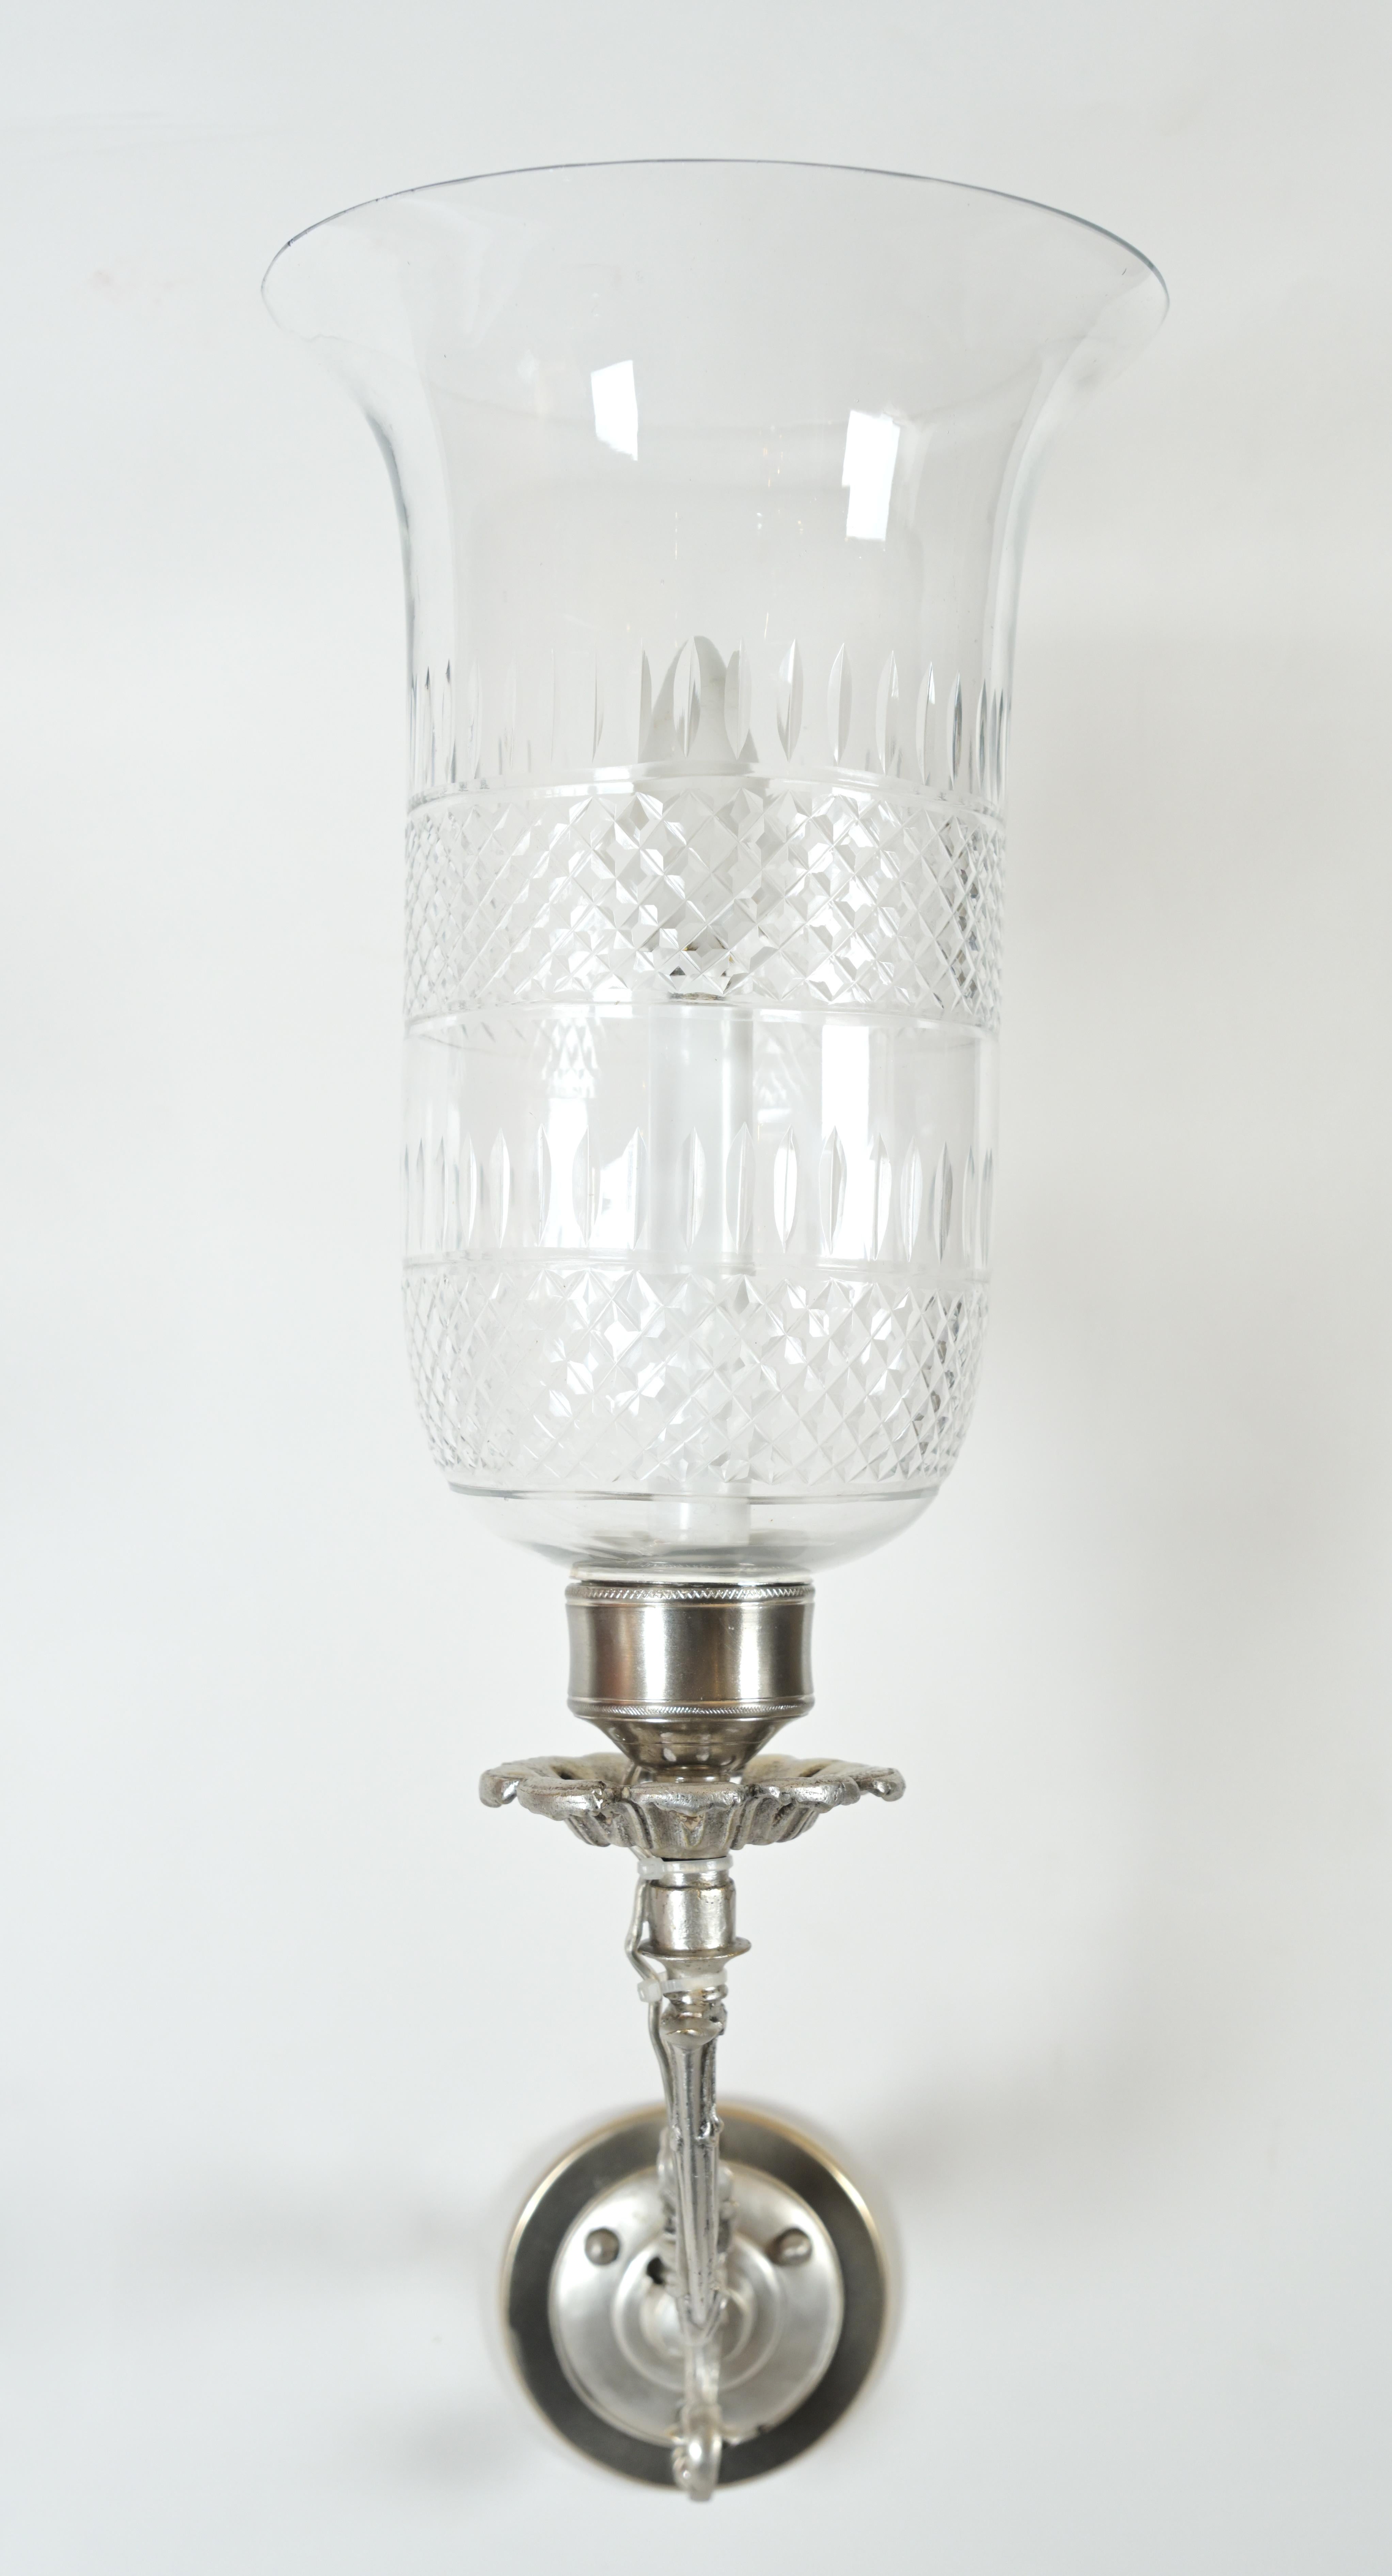 A pair of vintage sconces having floral decorated silver arms with a leaf bocchette cupping the light. The vase glass shades having two borders of cross hatched frames along the middle and bottom. Circa 1900s. UL wiring included.